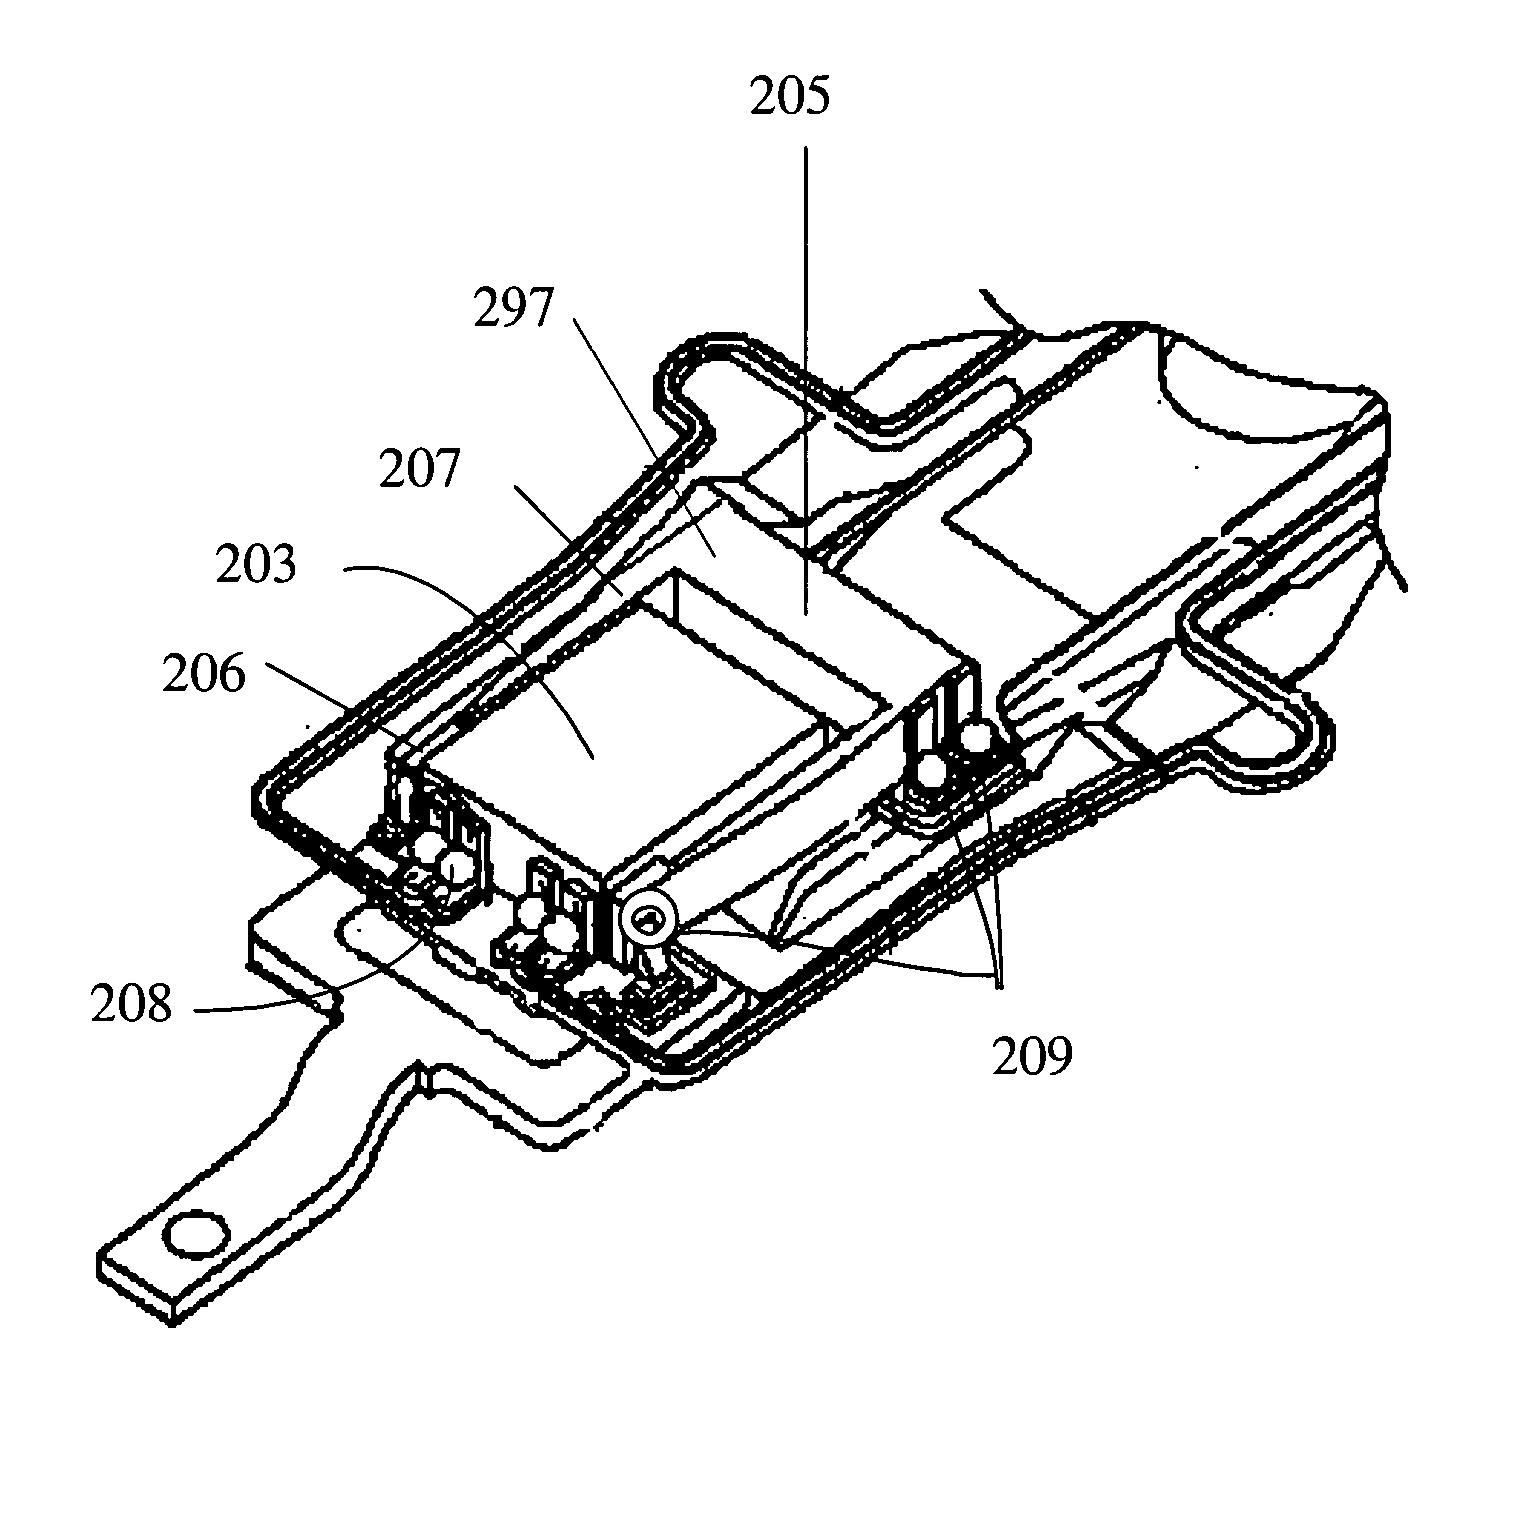 Micro-actuator, vibration canceller, head gimbal assembly, and disk drive unit with the same